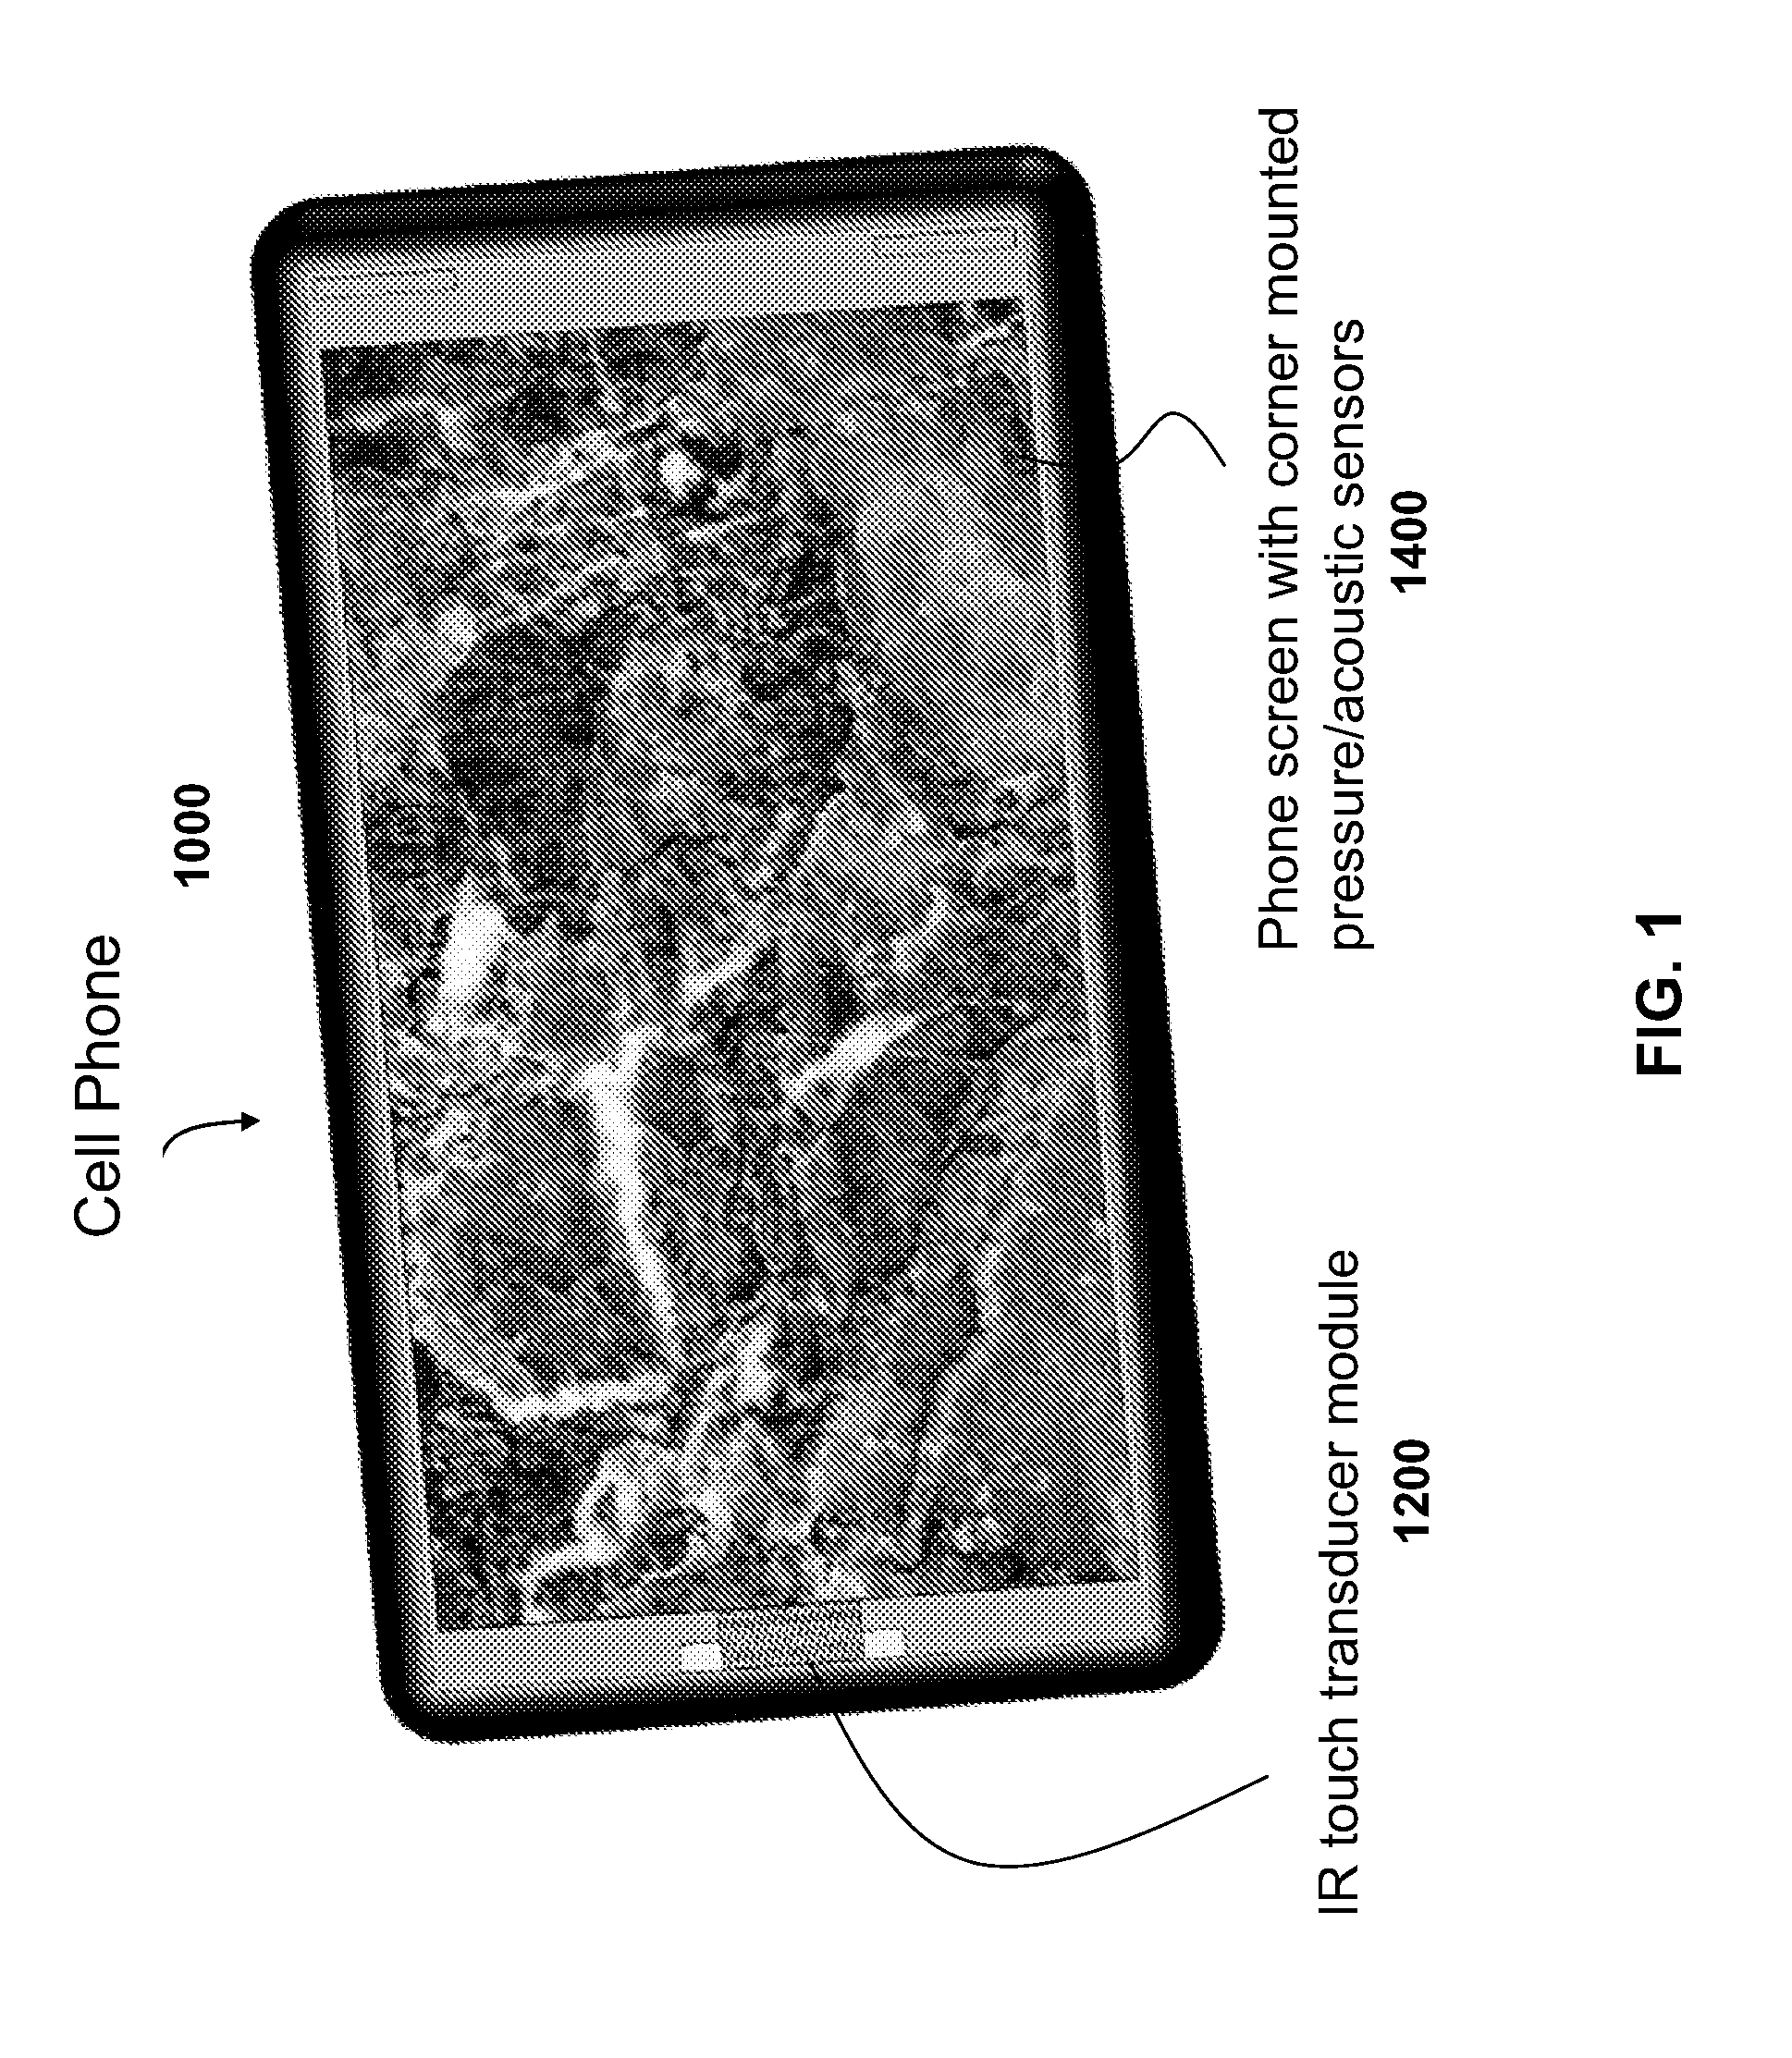 System and Method for Contactless Touch Screen